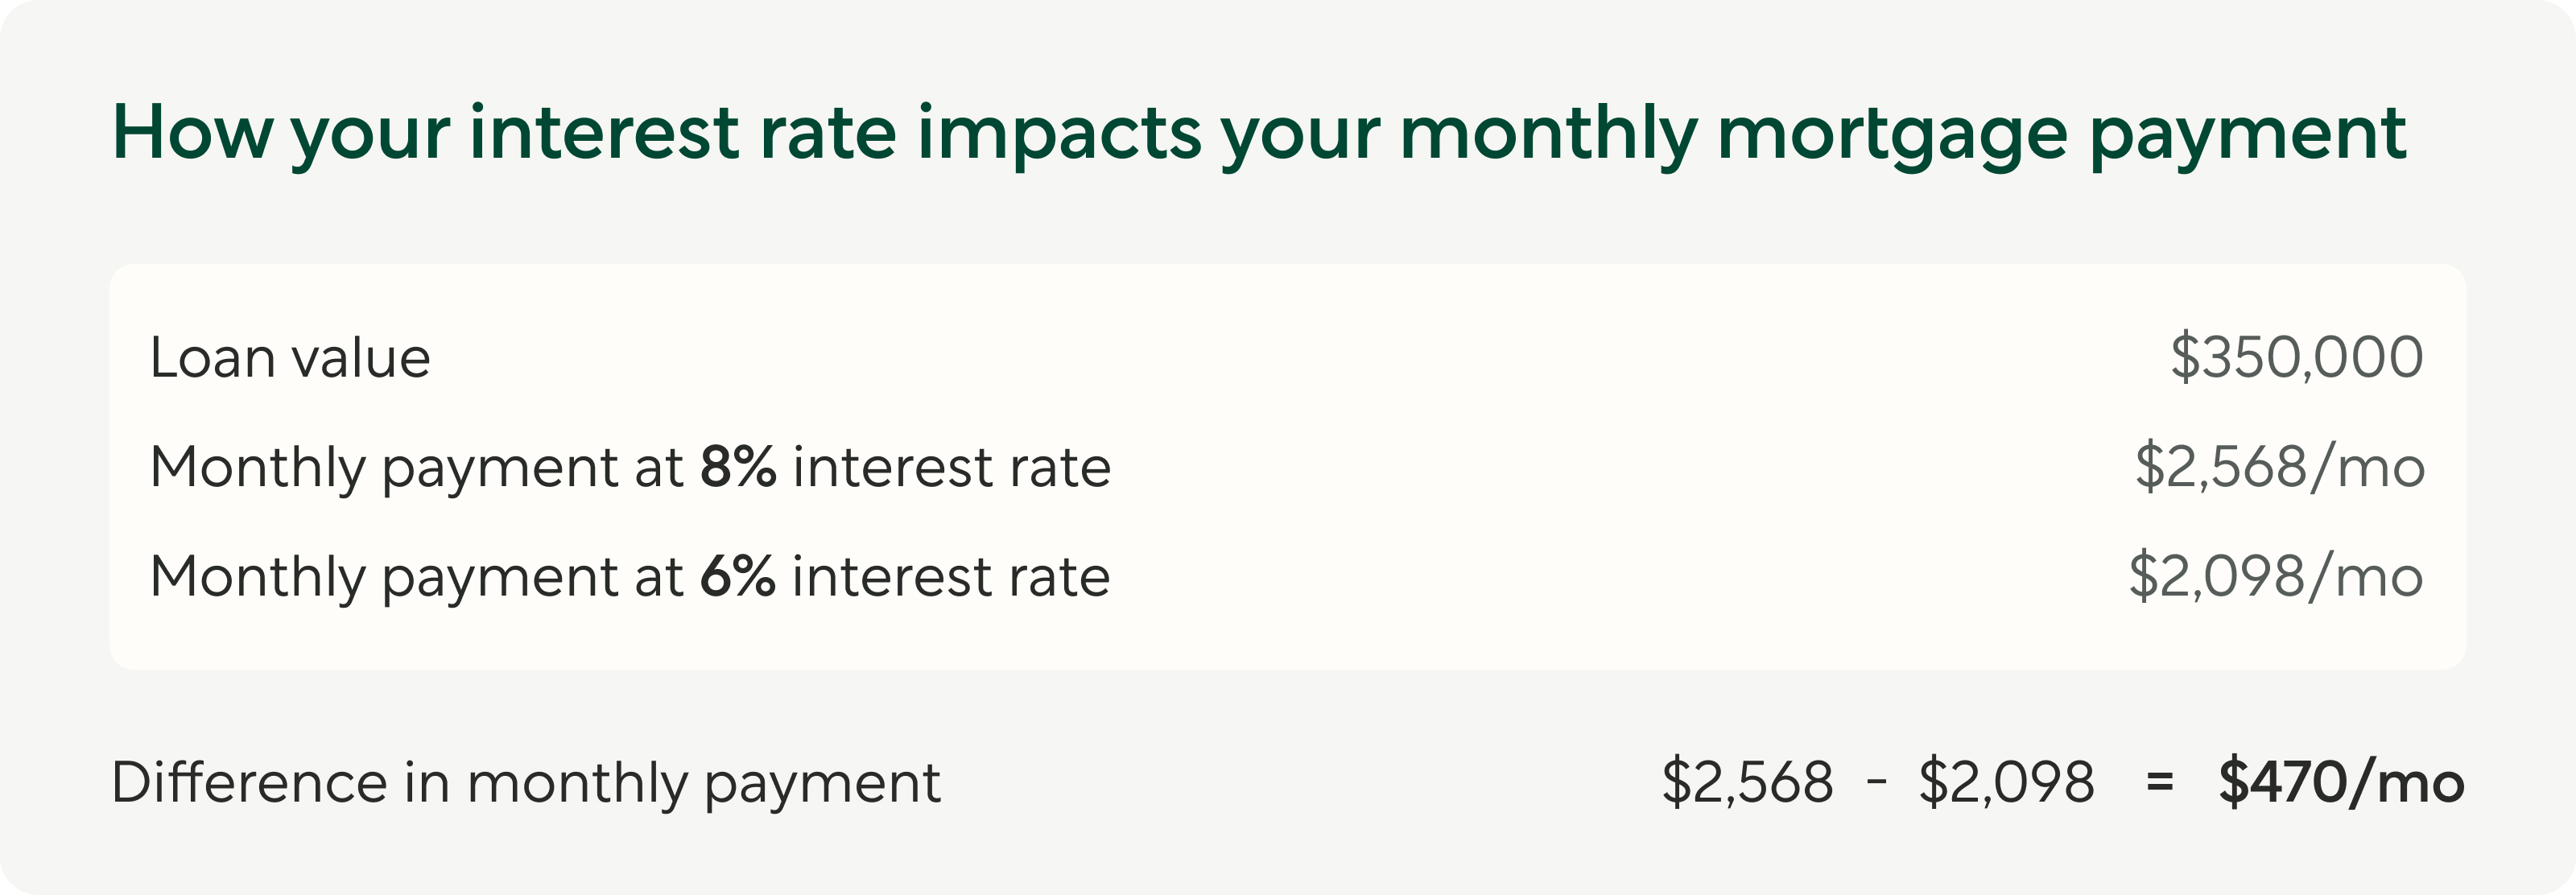 How your interest rate impacts your monthly mortgage payment